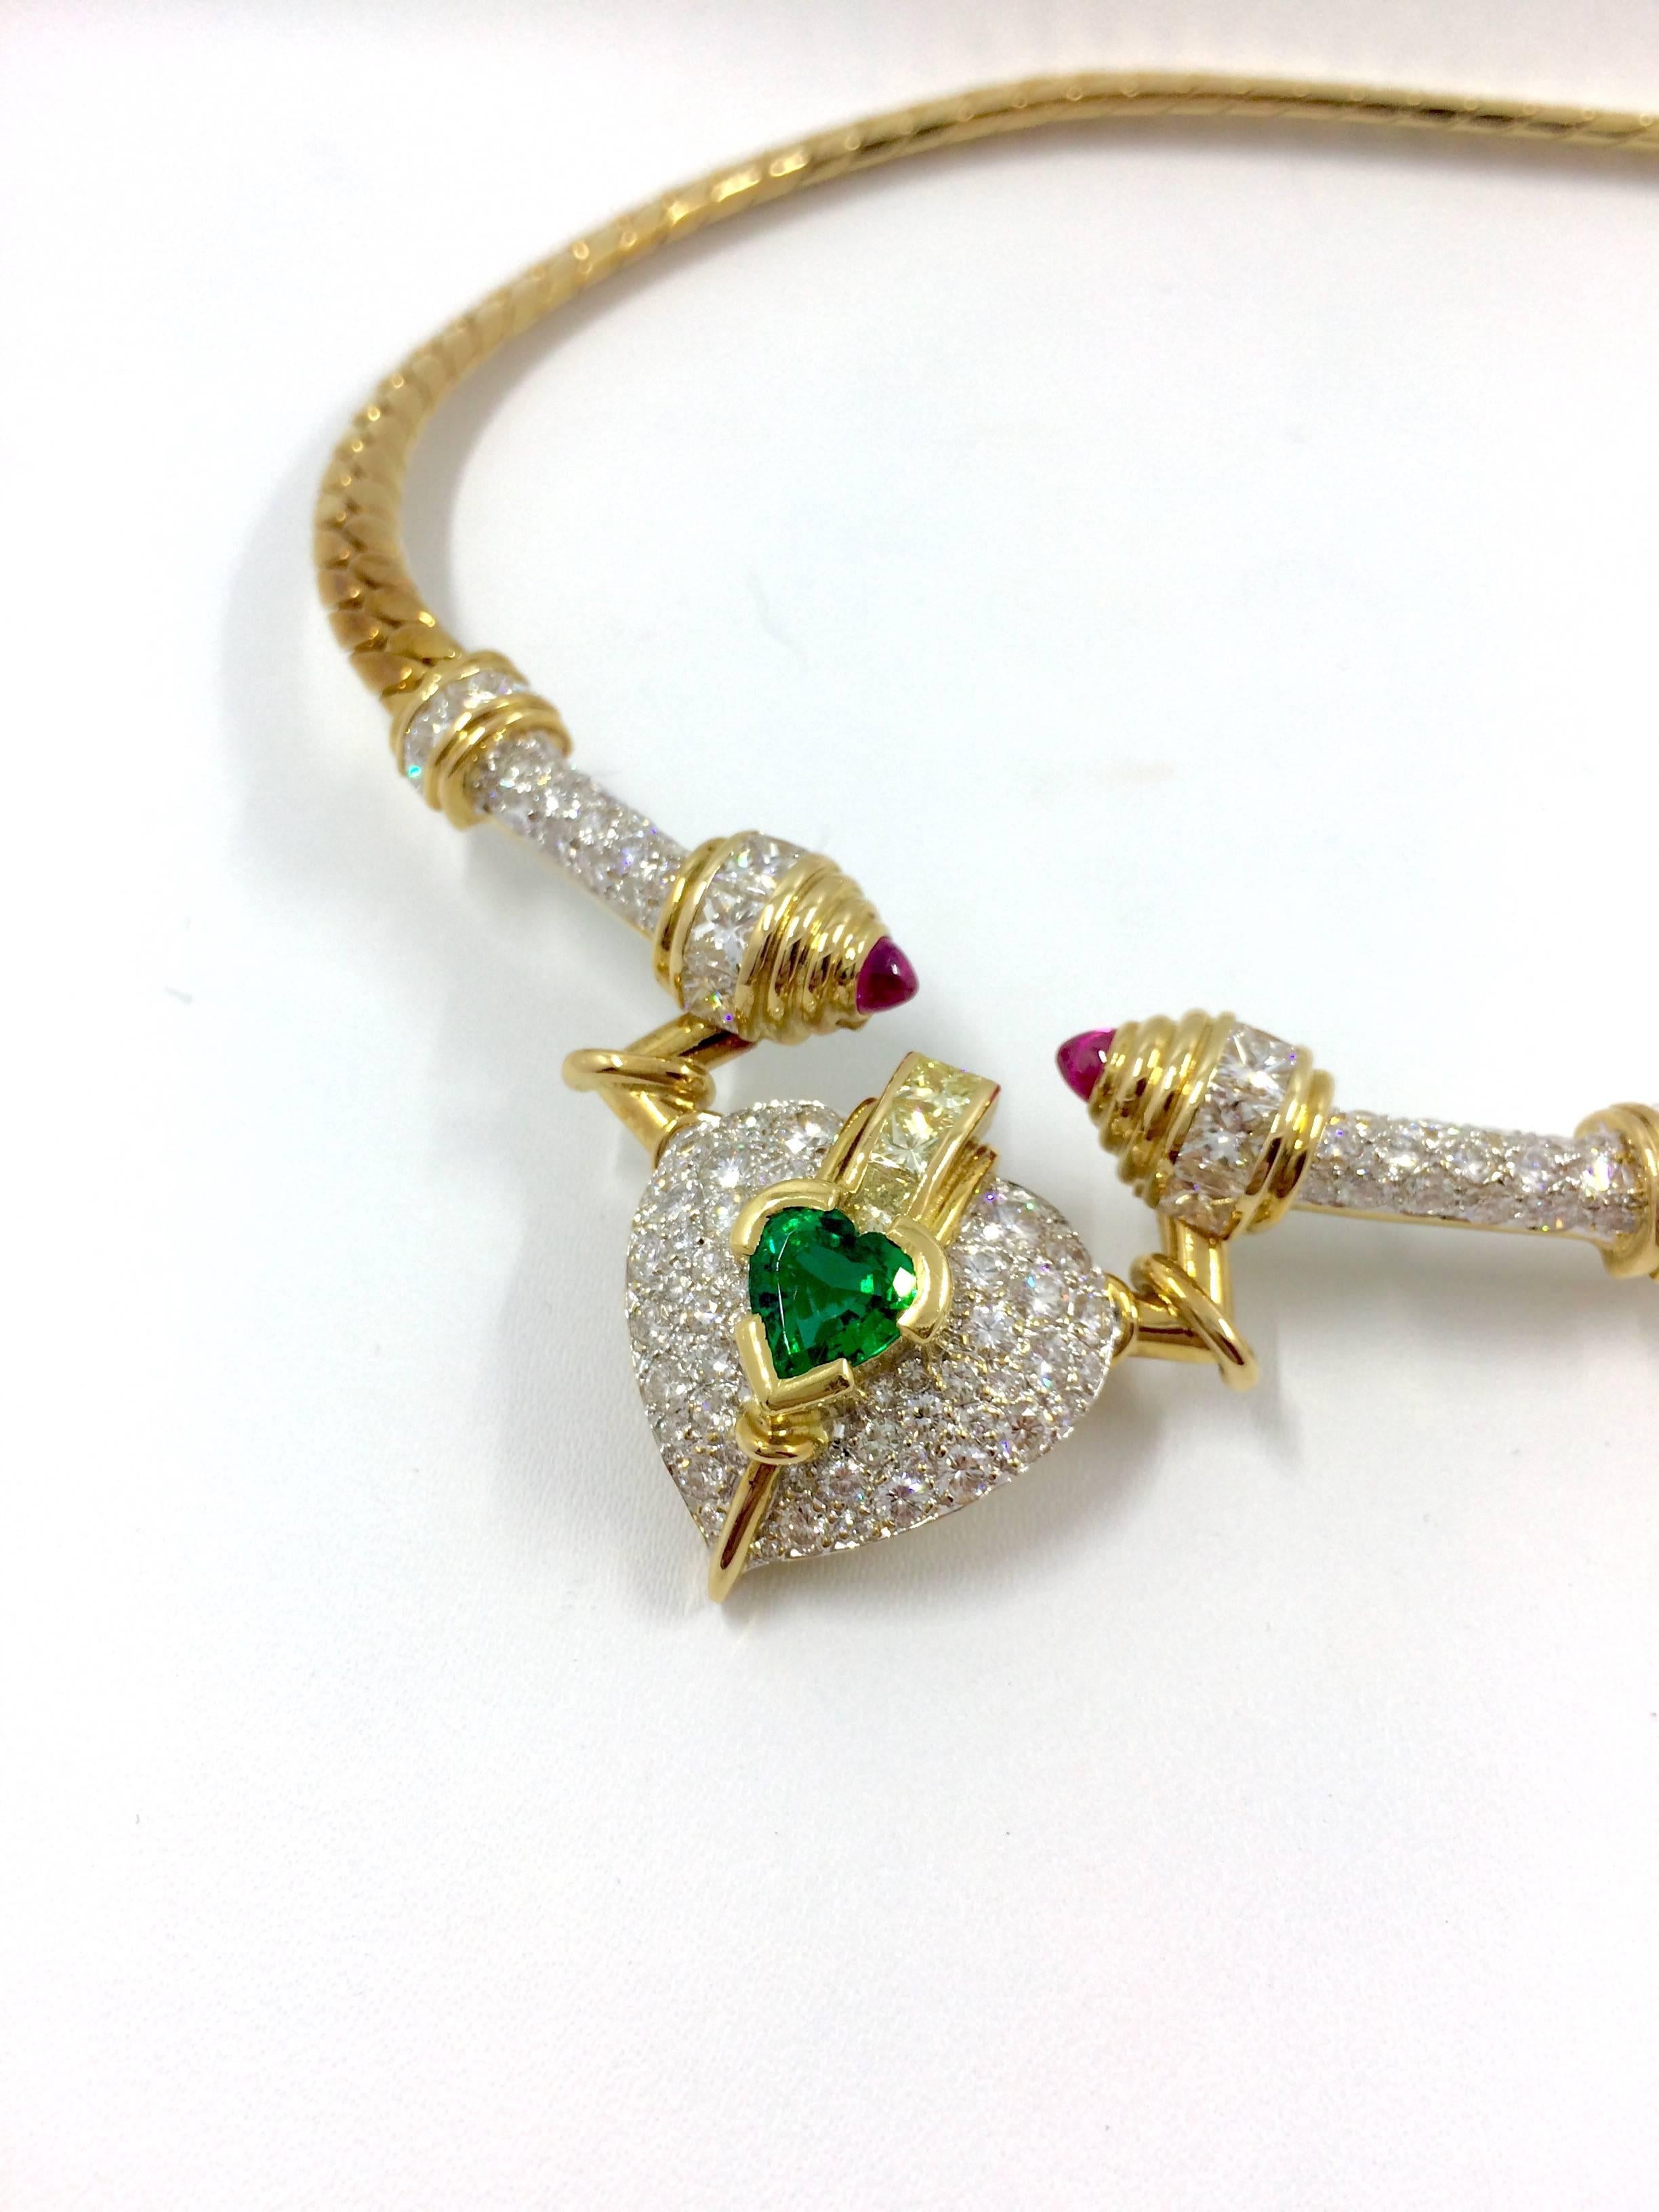 An unique yellow gold necklace set in the middle with a heart cut emerald surrounded by brilliant cut diamonds. 
3 princess cut fancy yellow diamonds are setted above the emerald.
The ends of the necklace set with a cabochon cut pink sapphire, 8